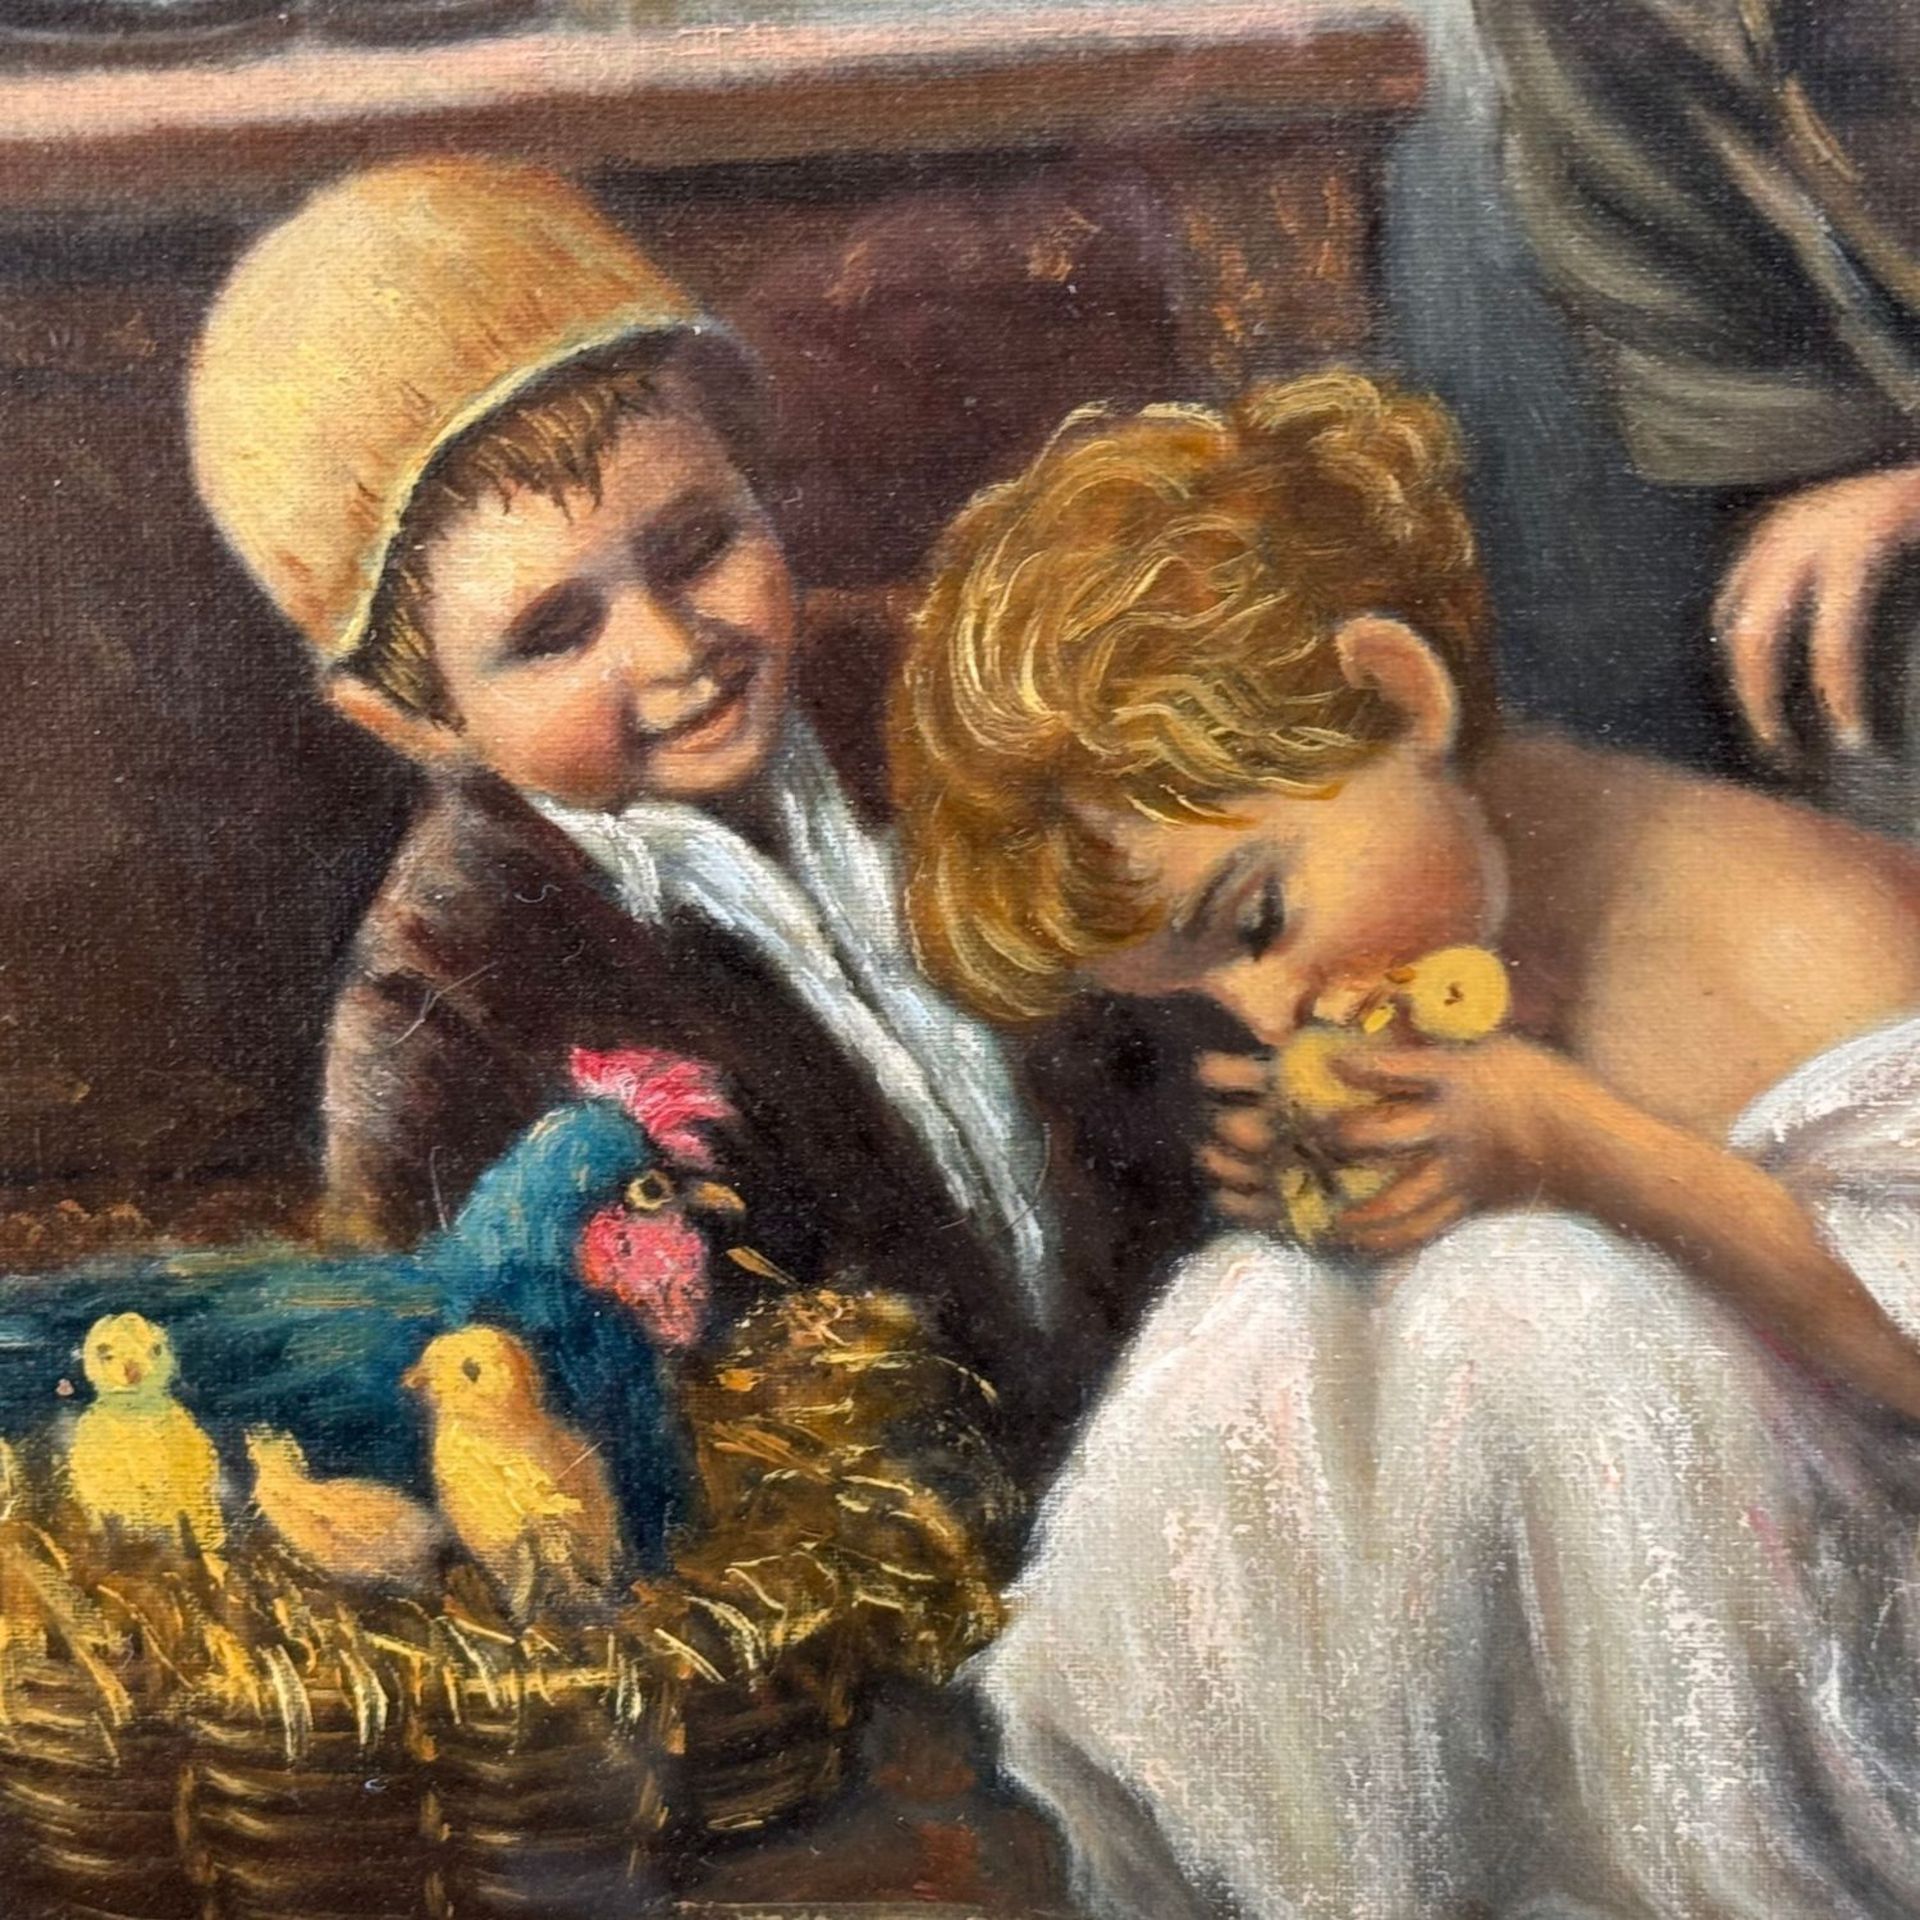 Children playing with chicks - Di Gennaro - Image 2 of 7